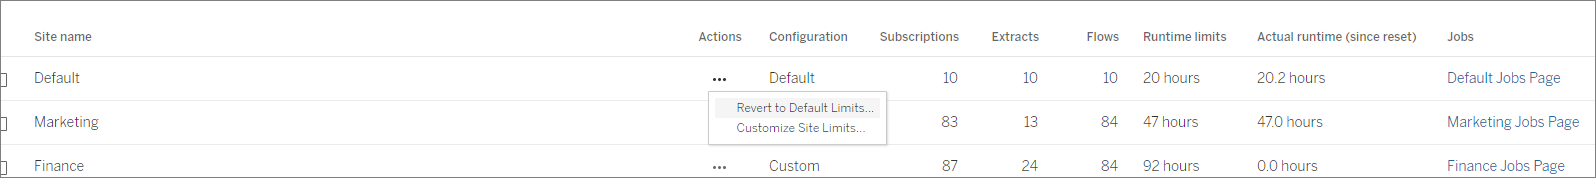 image shows a screenshot of the list of sites on the resource limits tab of the settings page where you can set custom limits for a site.